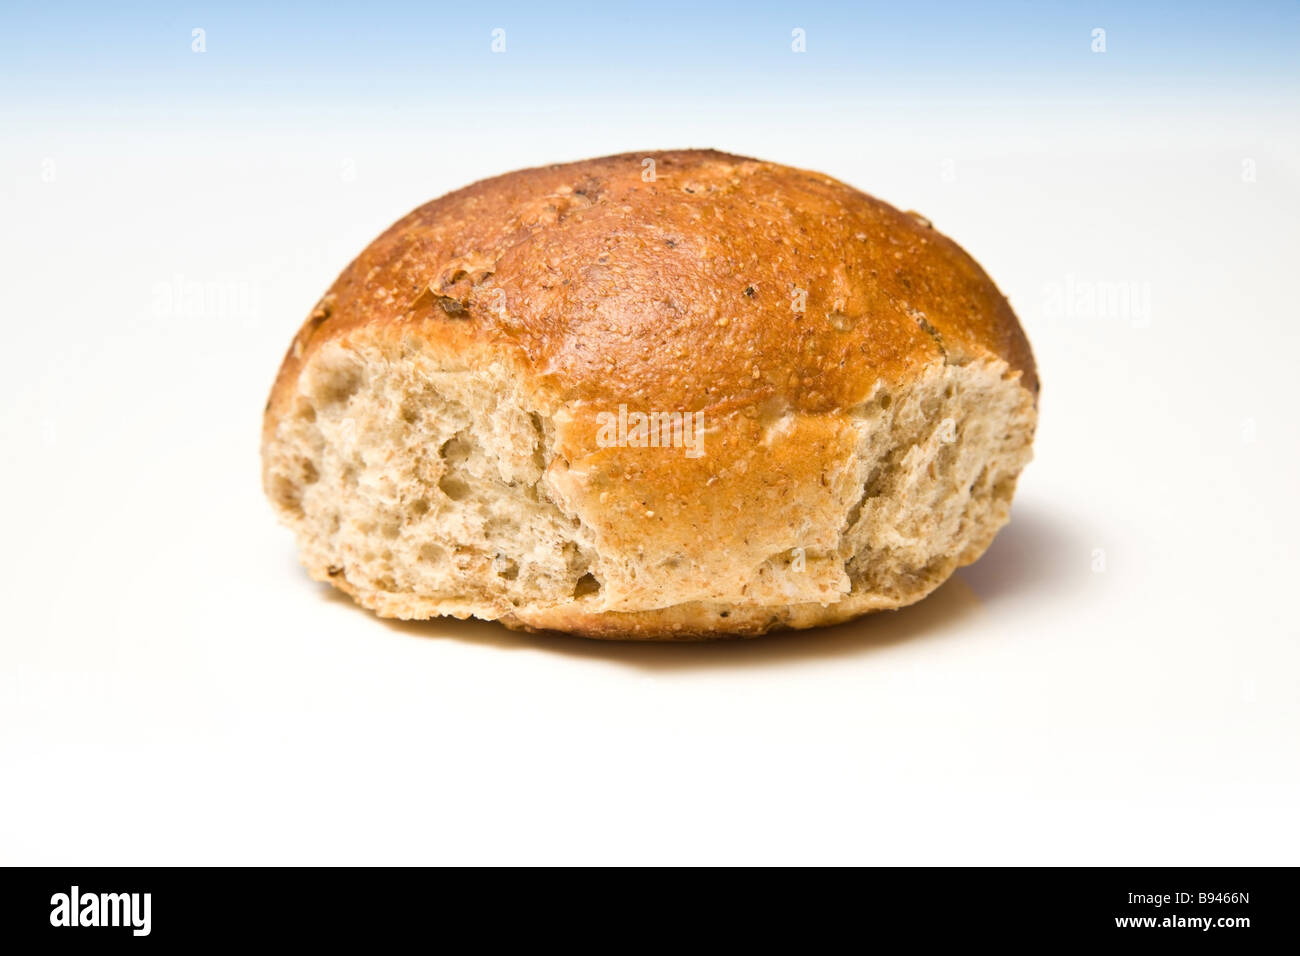 Wholemeal bread roll on a blue graduated studio background Stock Photo